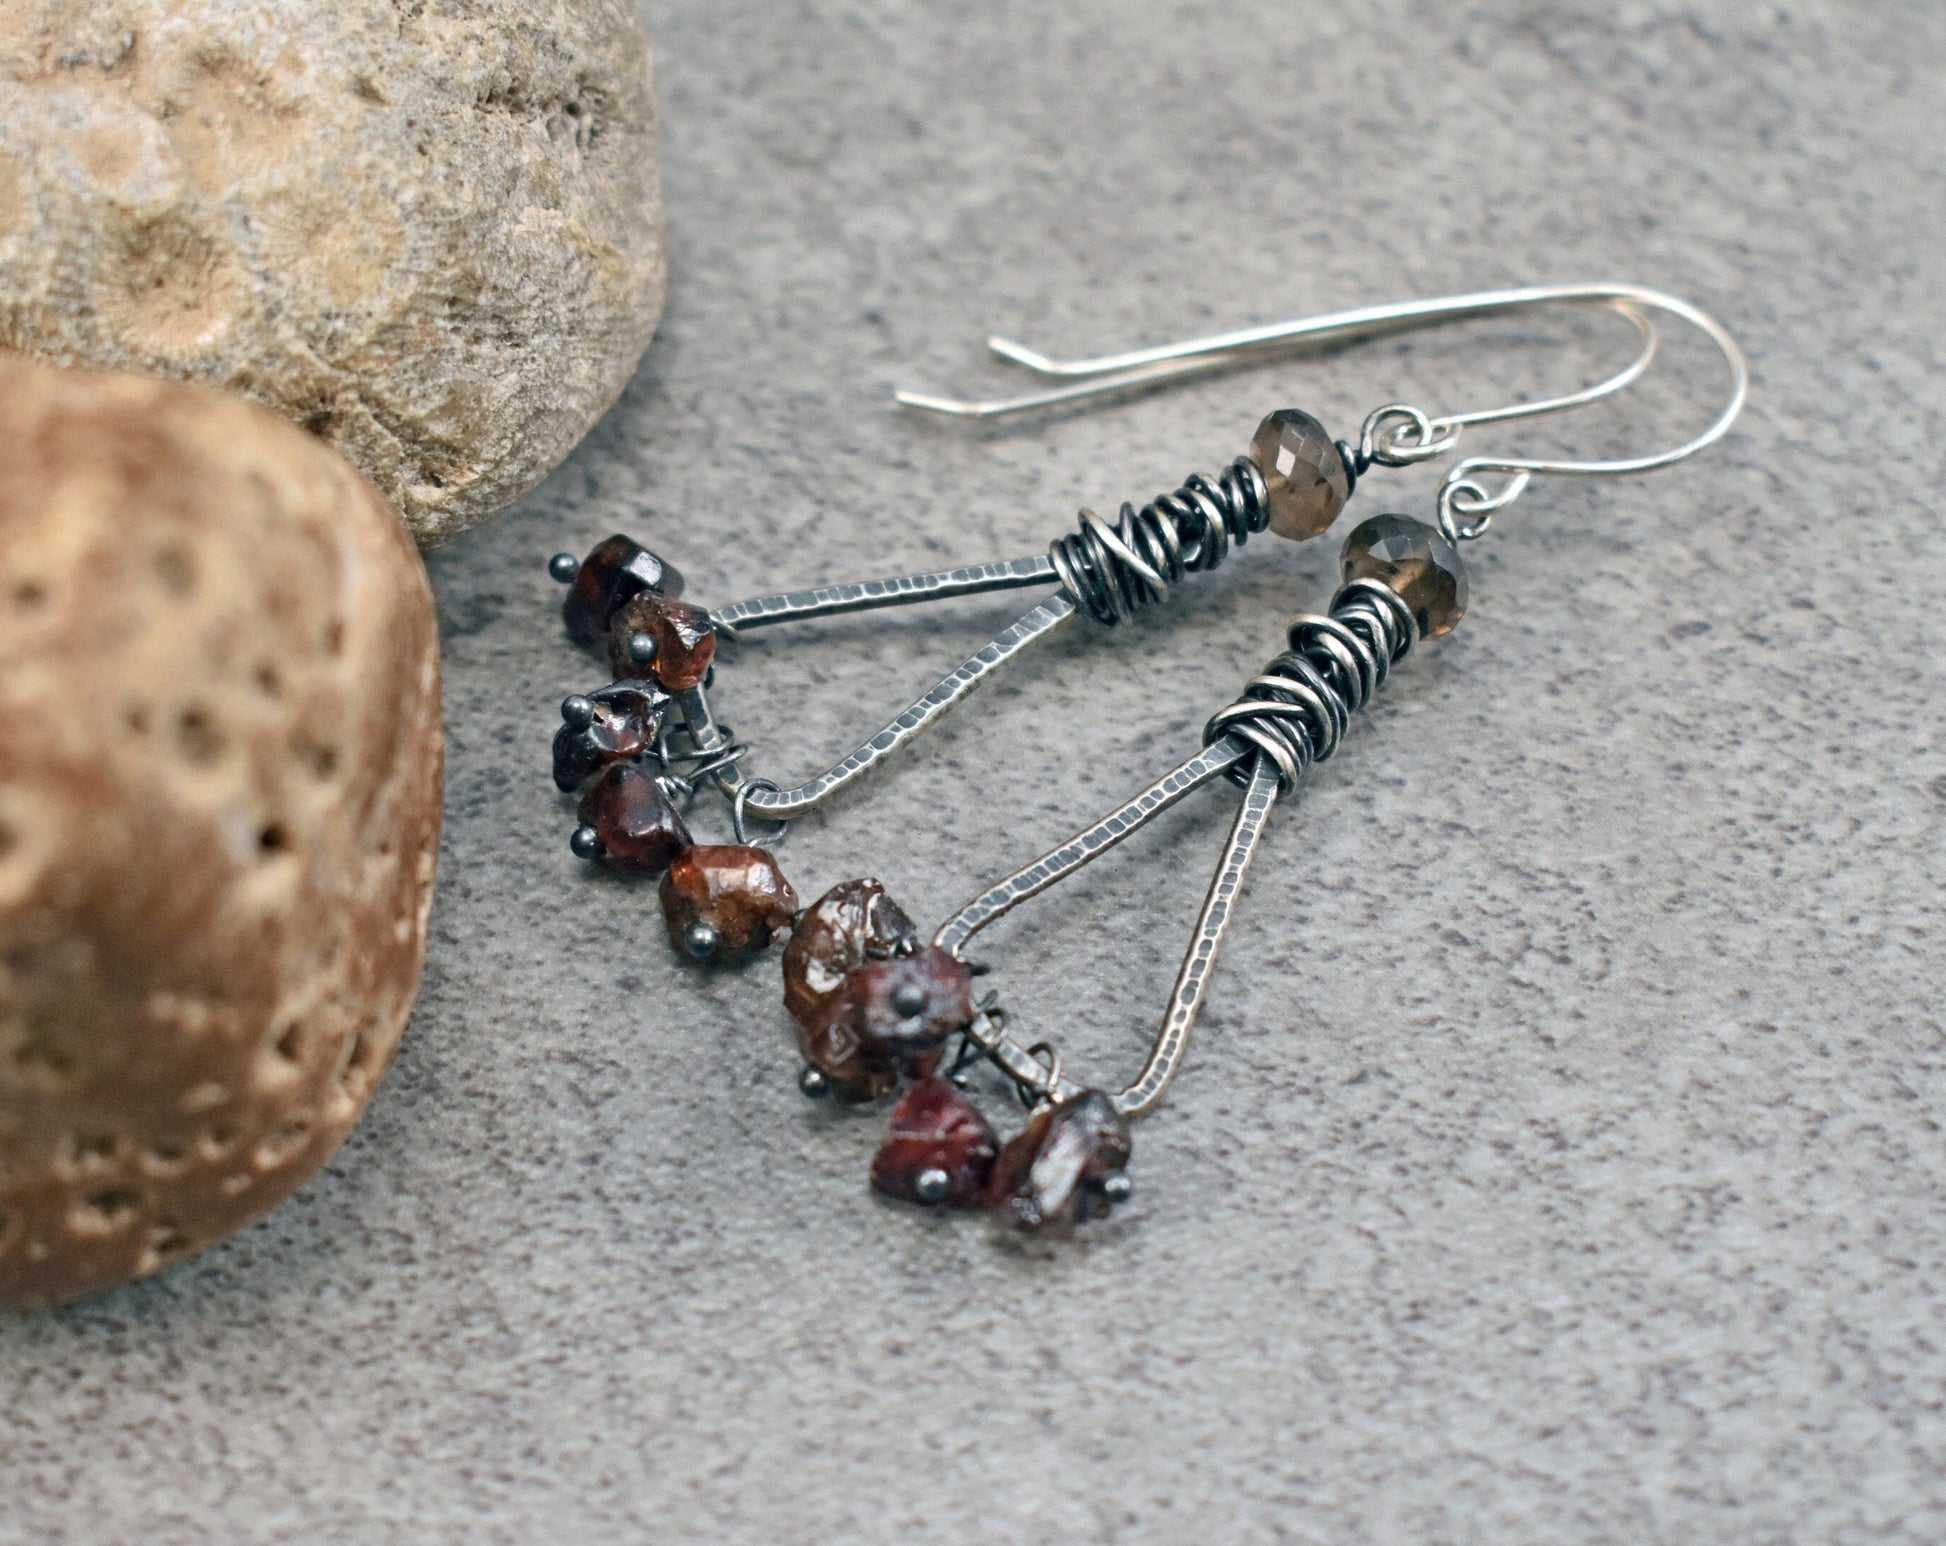 Smoky Quartz and Zircon Earrings Sterling Silver, Gray and Dark Red Gemstone Dangles, Messy Wire Wrap Triangle, Natural Stone Jewelry